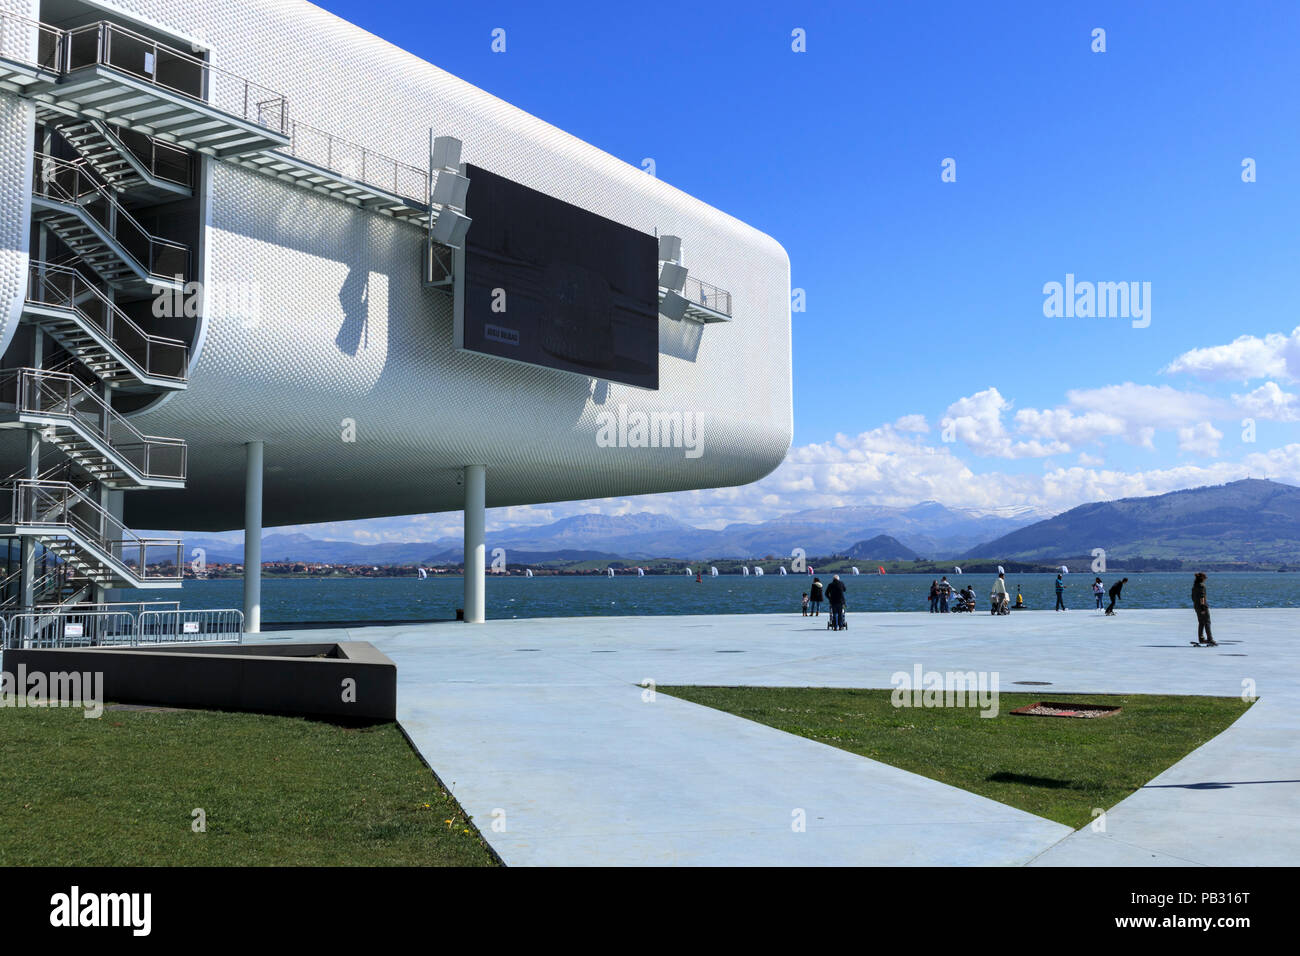 Abstract view of the Centro Botín, an arts centre designed by Pritzker Prize-winner architect Renzo Piano overlooking the bay in Santander Spain Stock Photo